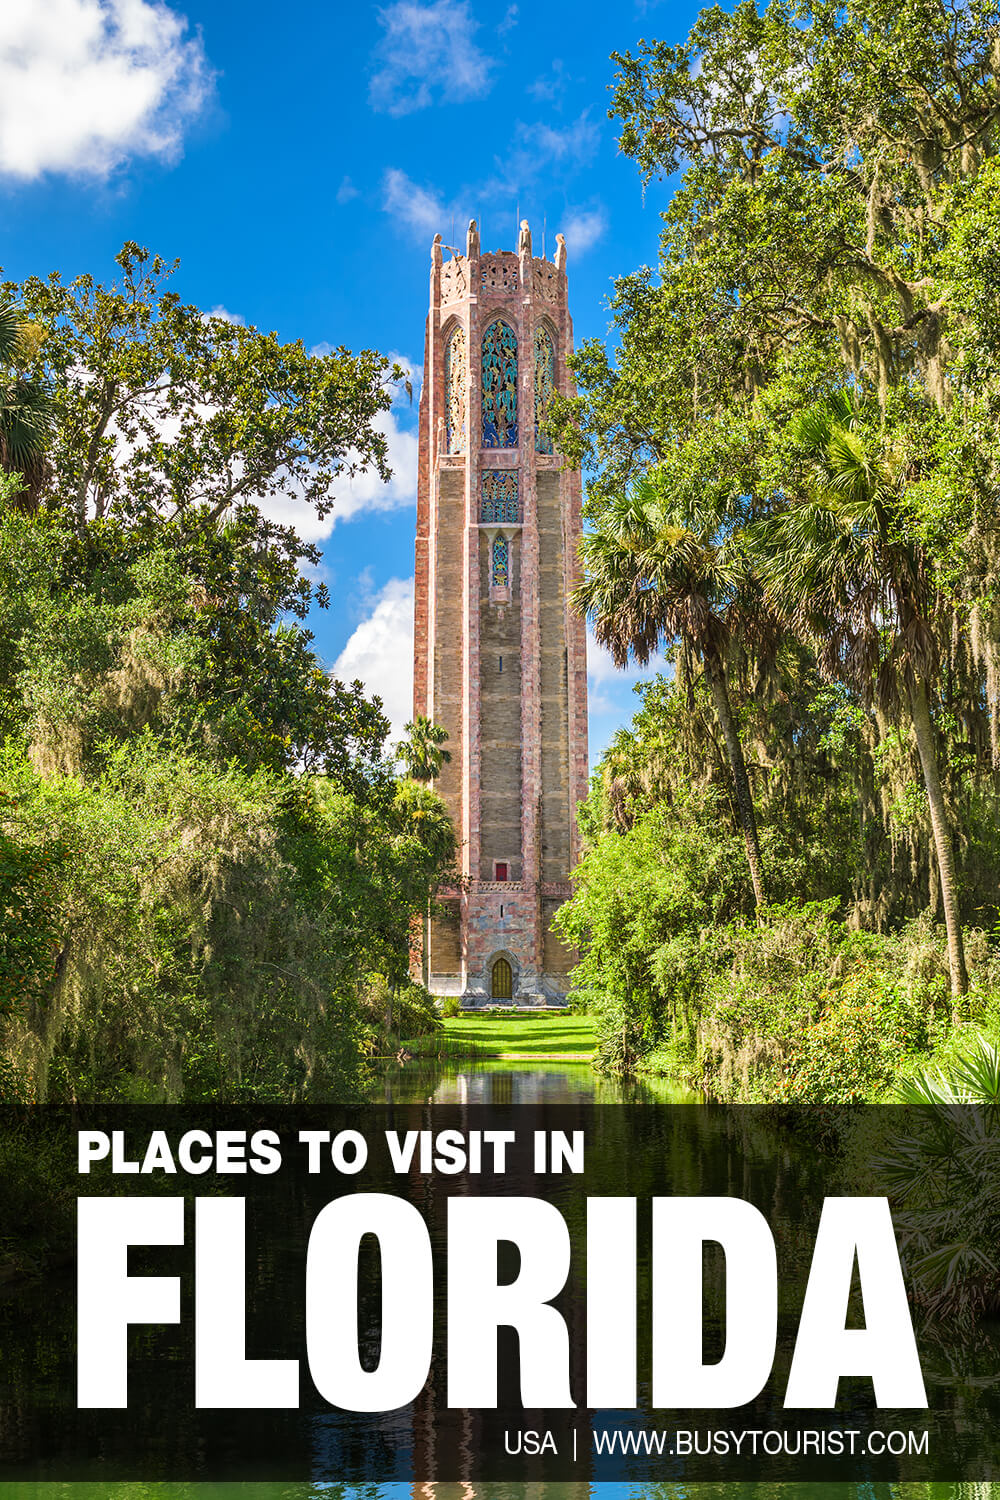 60 Things To Do & Places To Visit In Florida - Attractions & Activities